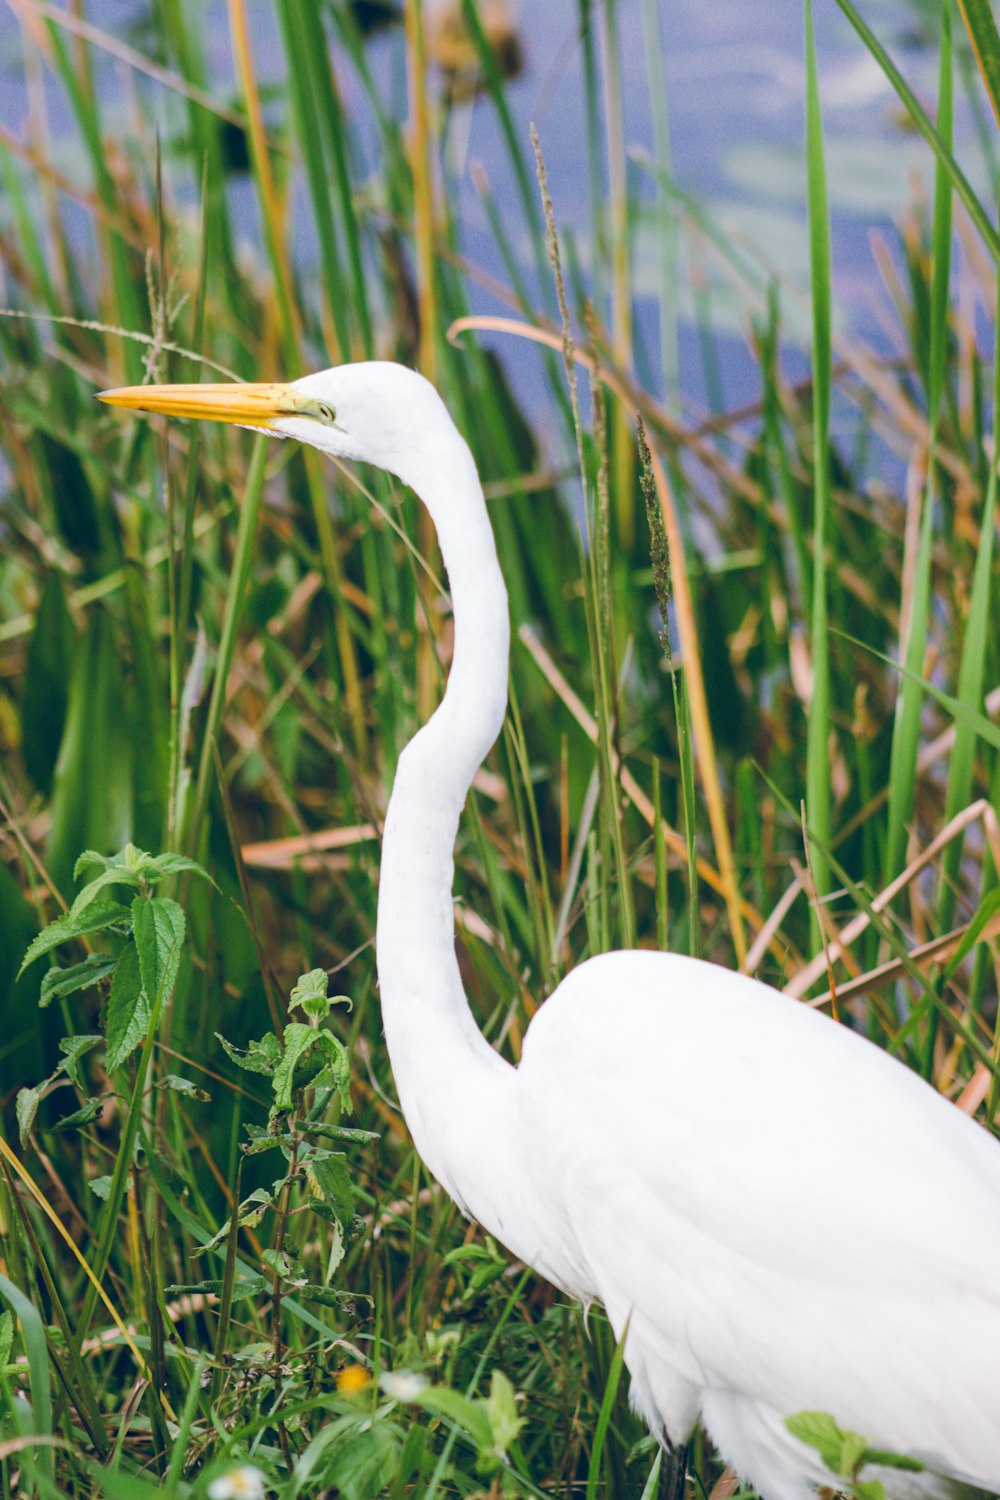 a white bird with a long neck standing in tall grass